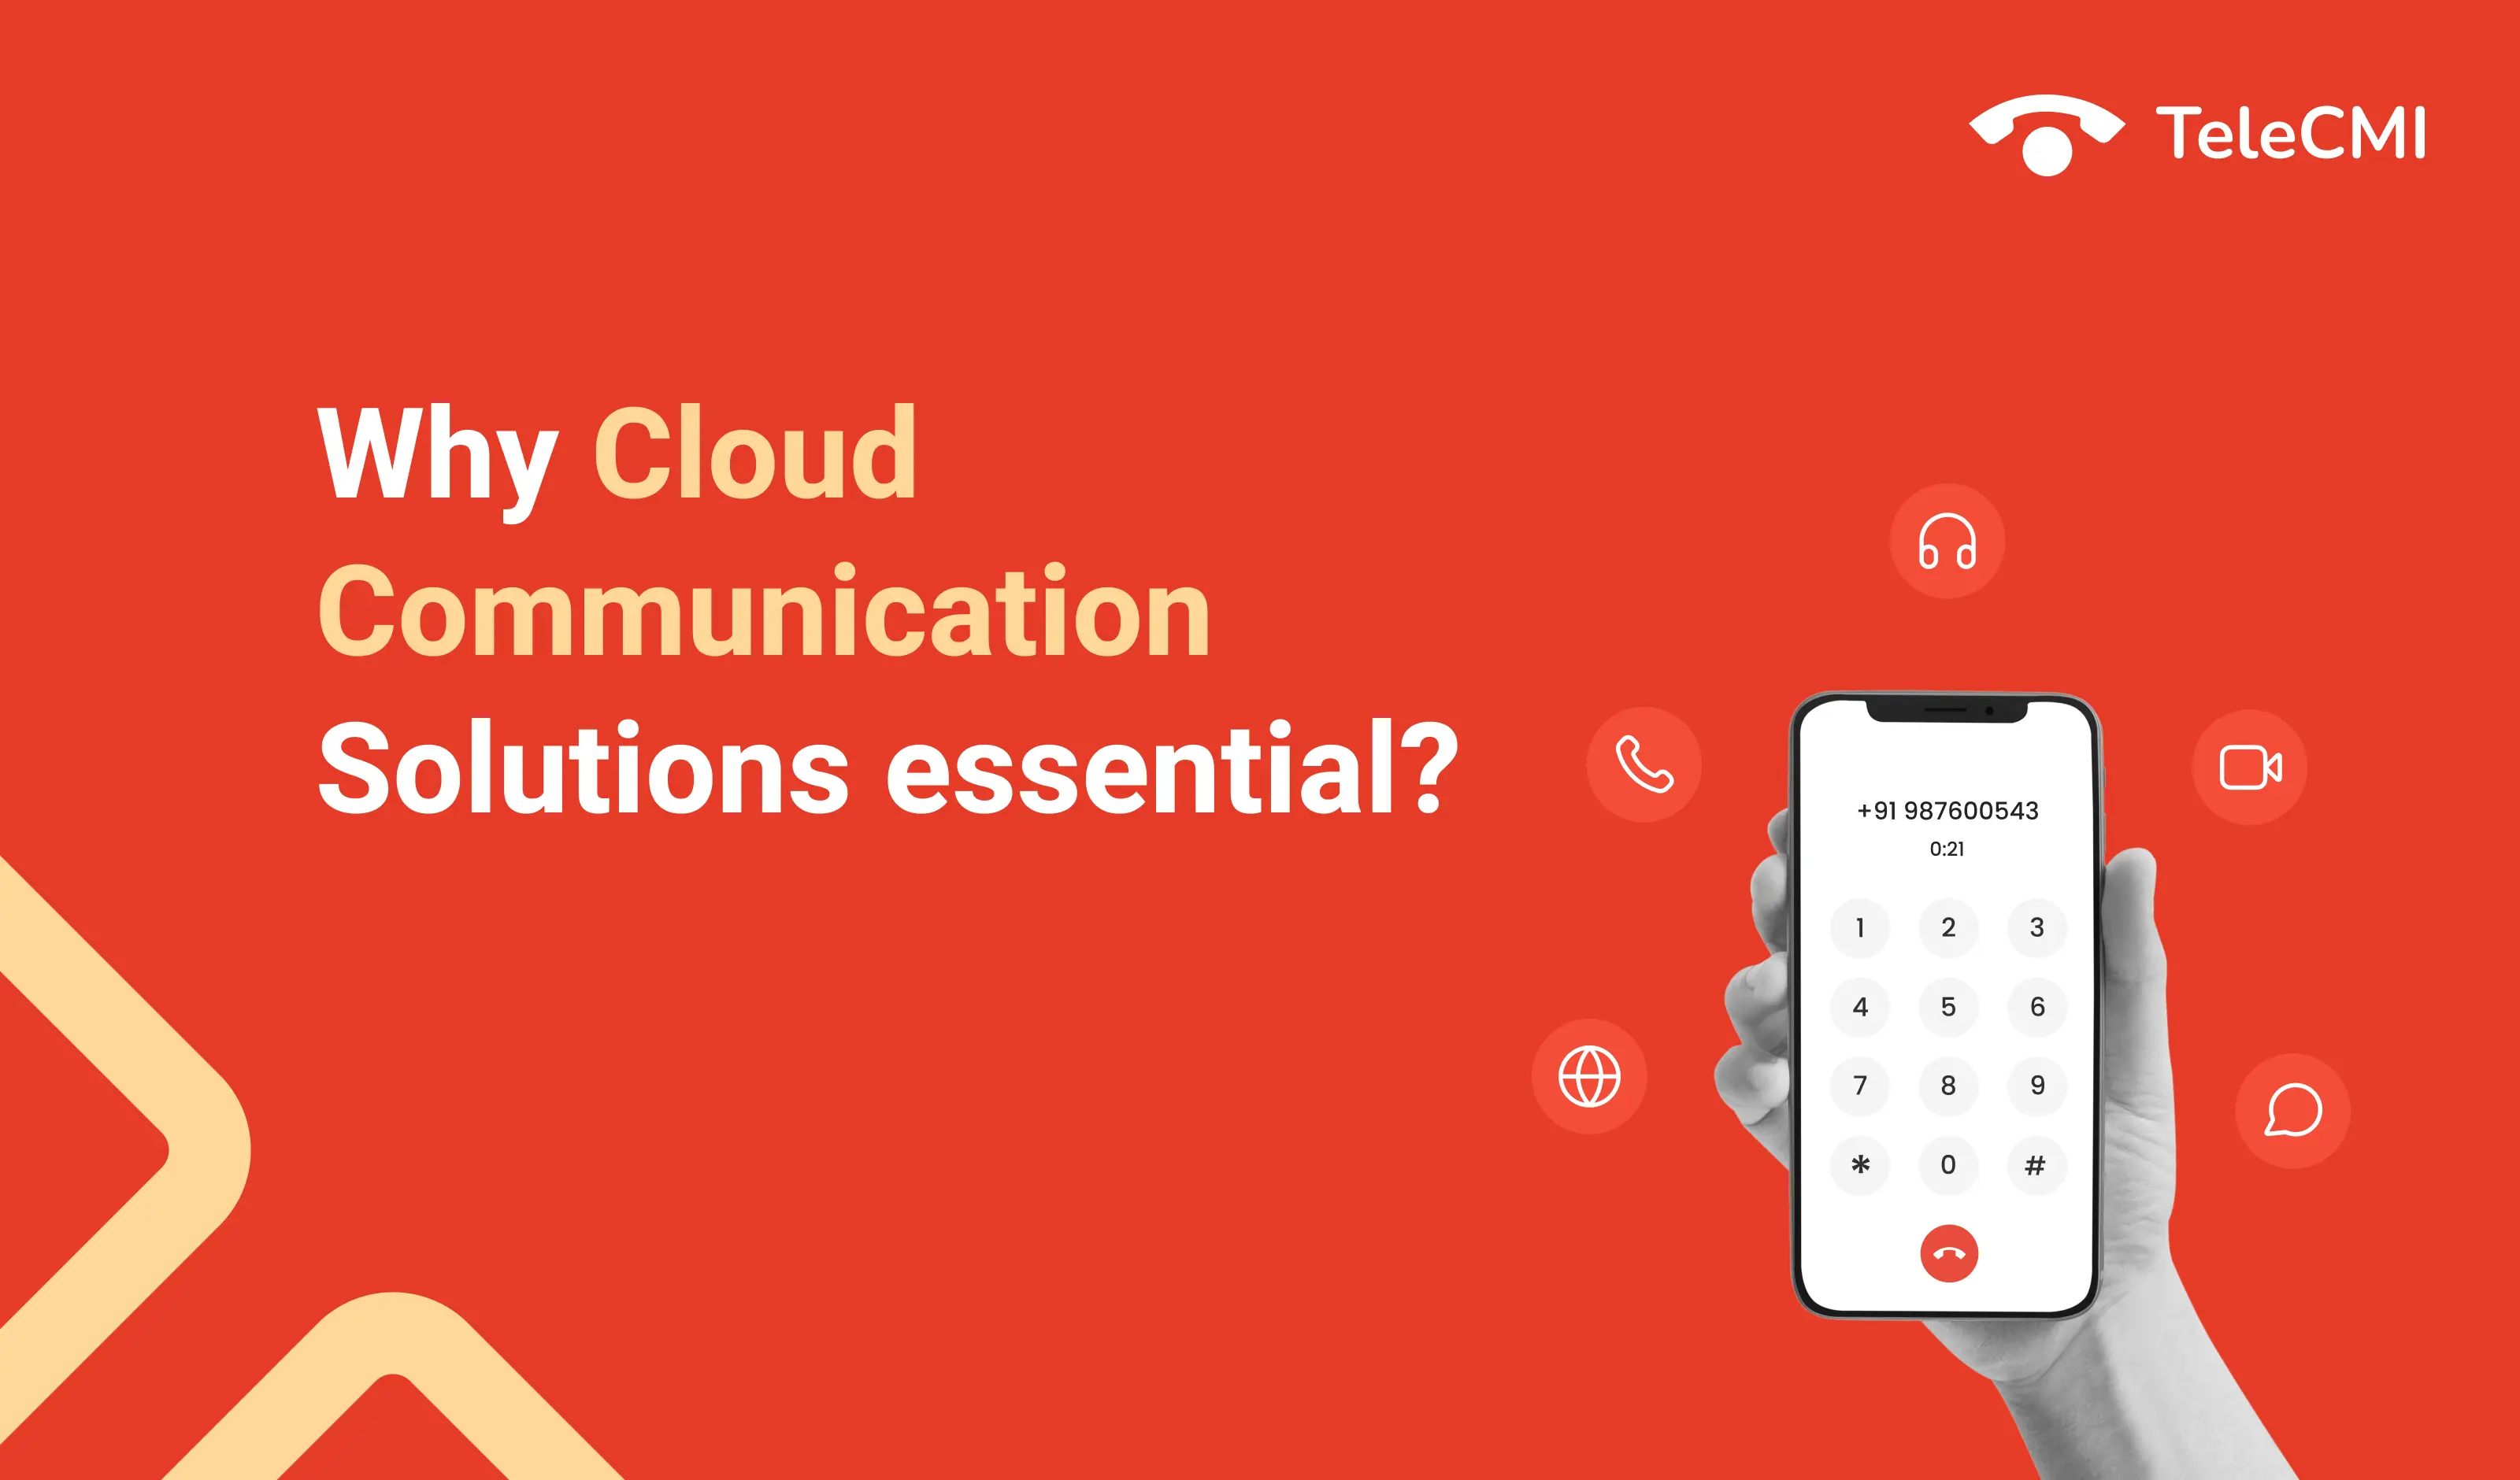 Why Are Cloud Communication Solutions Essential
            for Businesses?